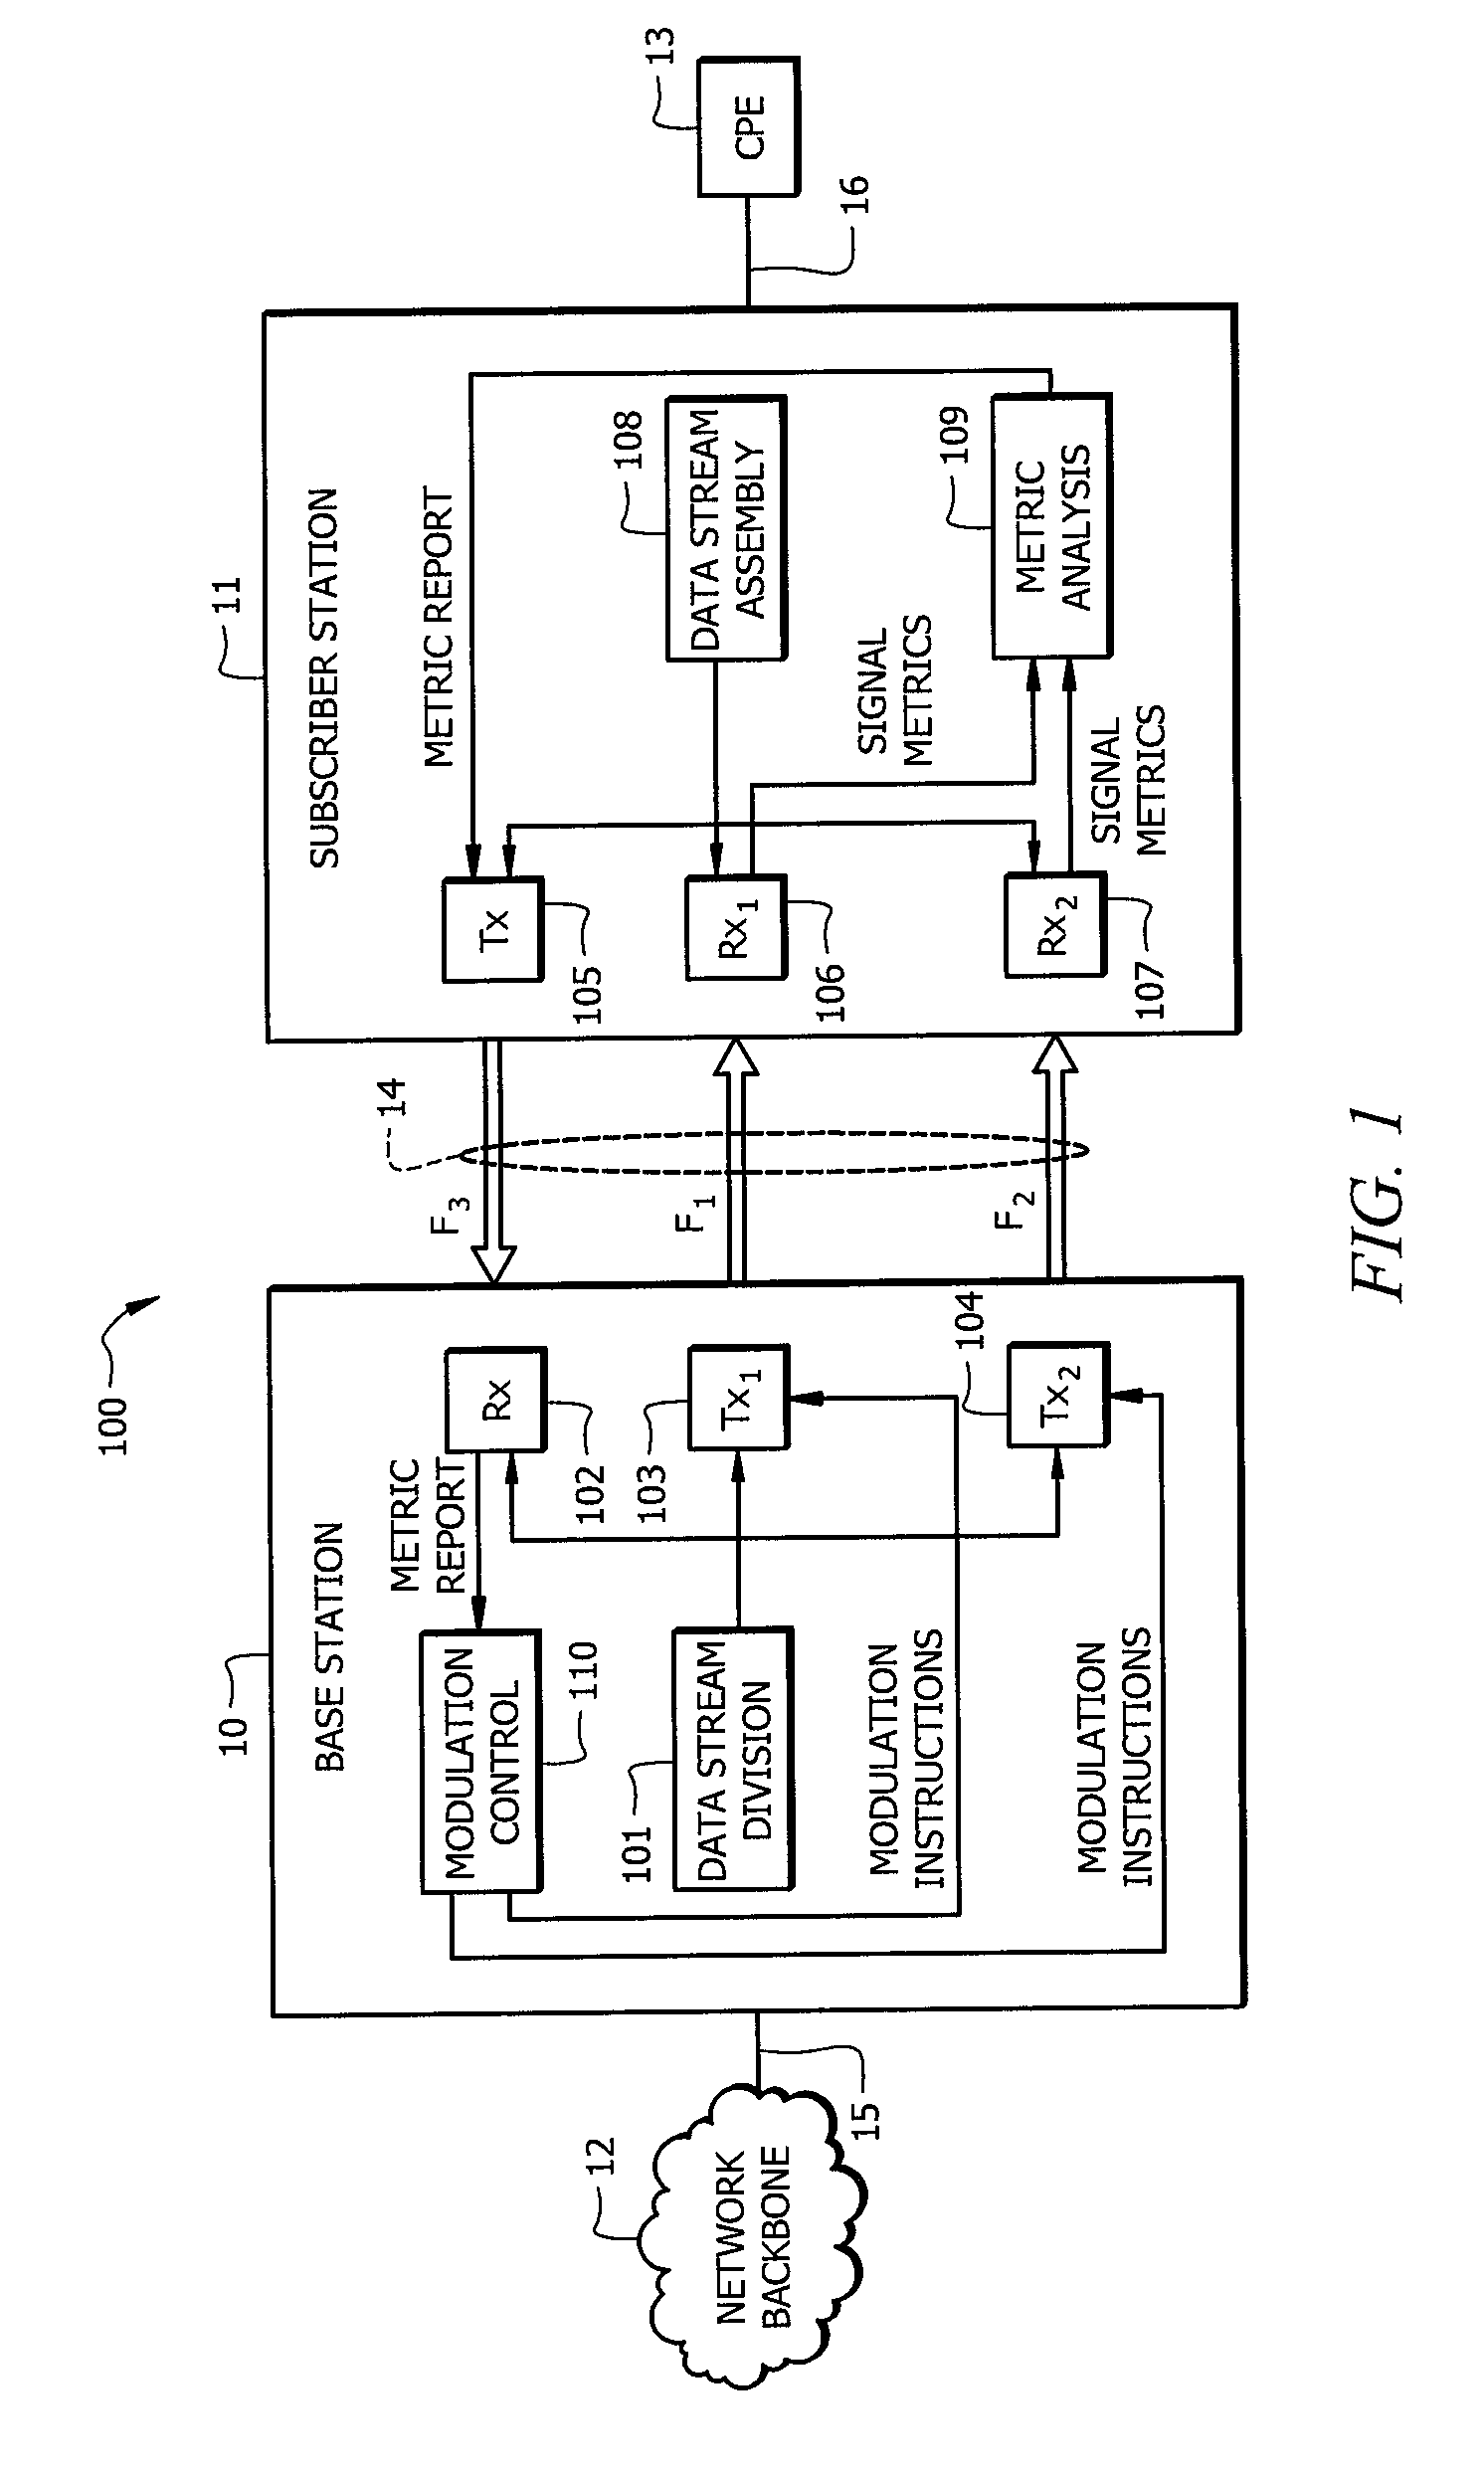 System and method for stacking receiver channels for increased system through-put in an RF data transmission system